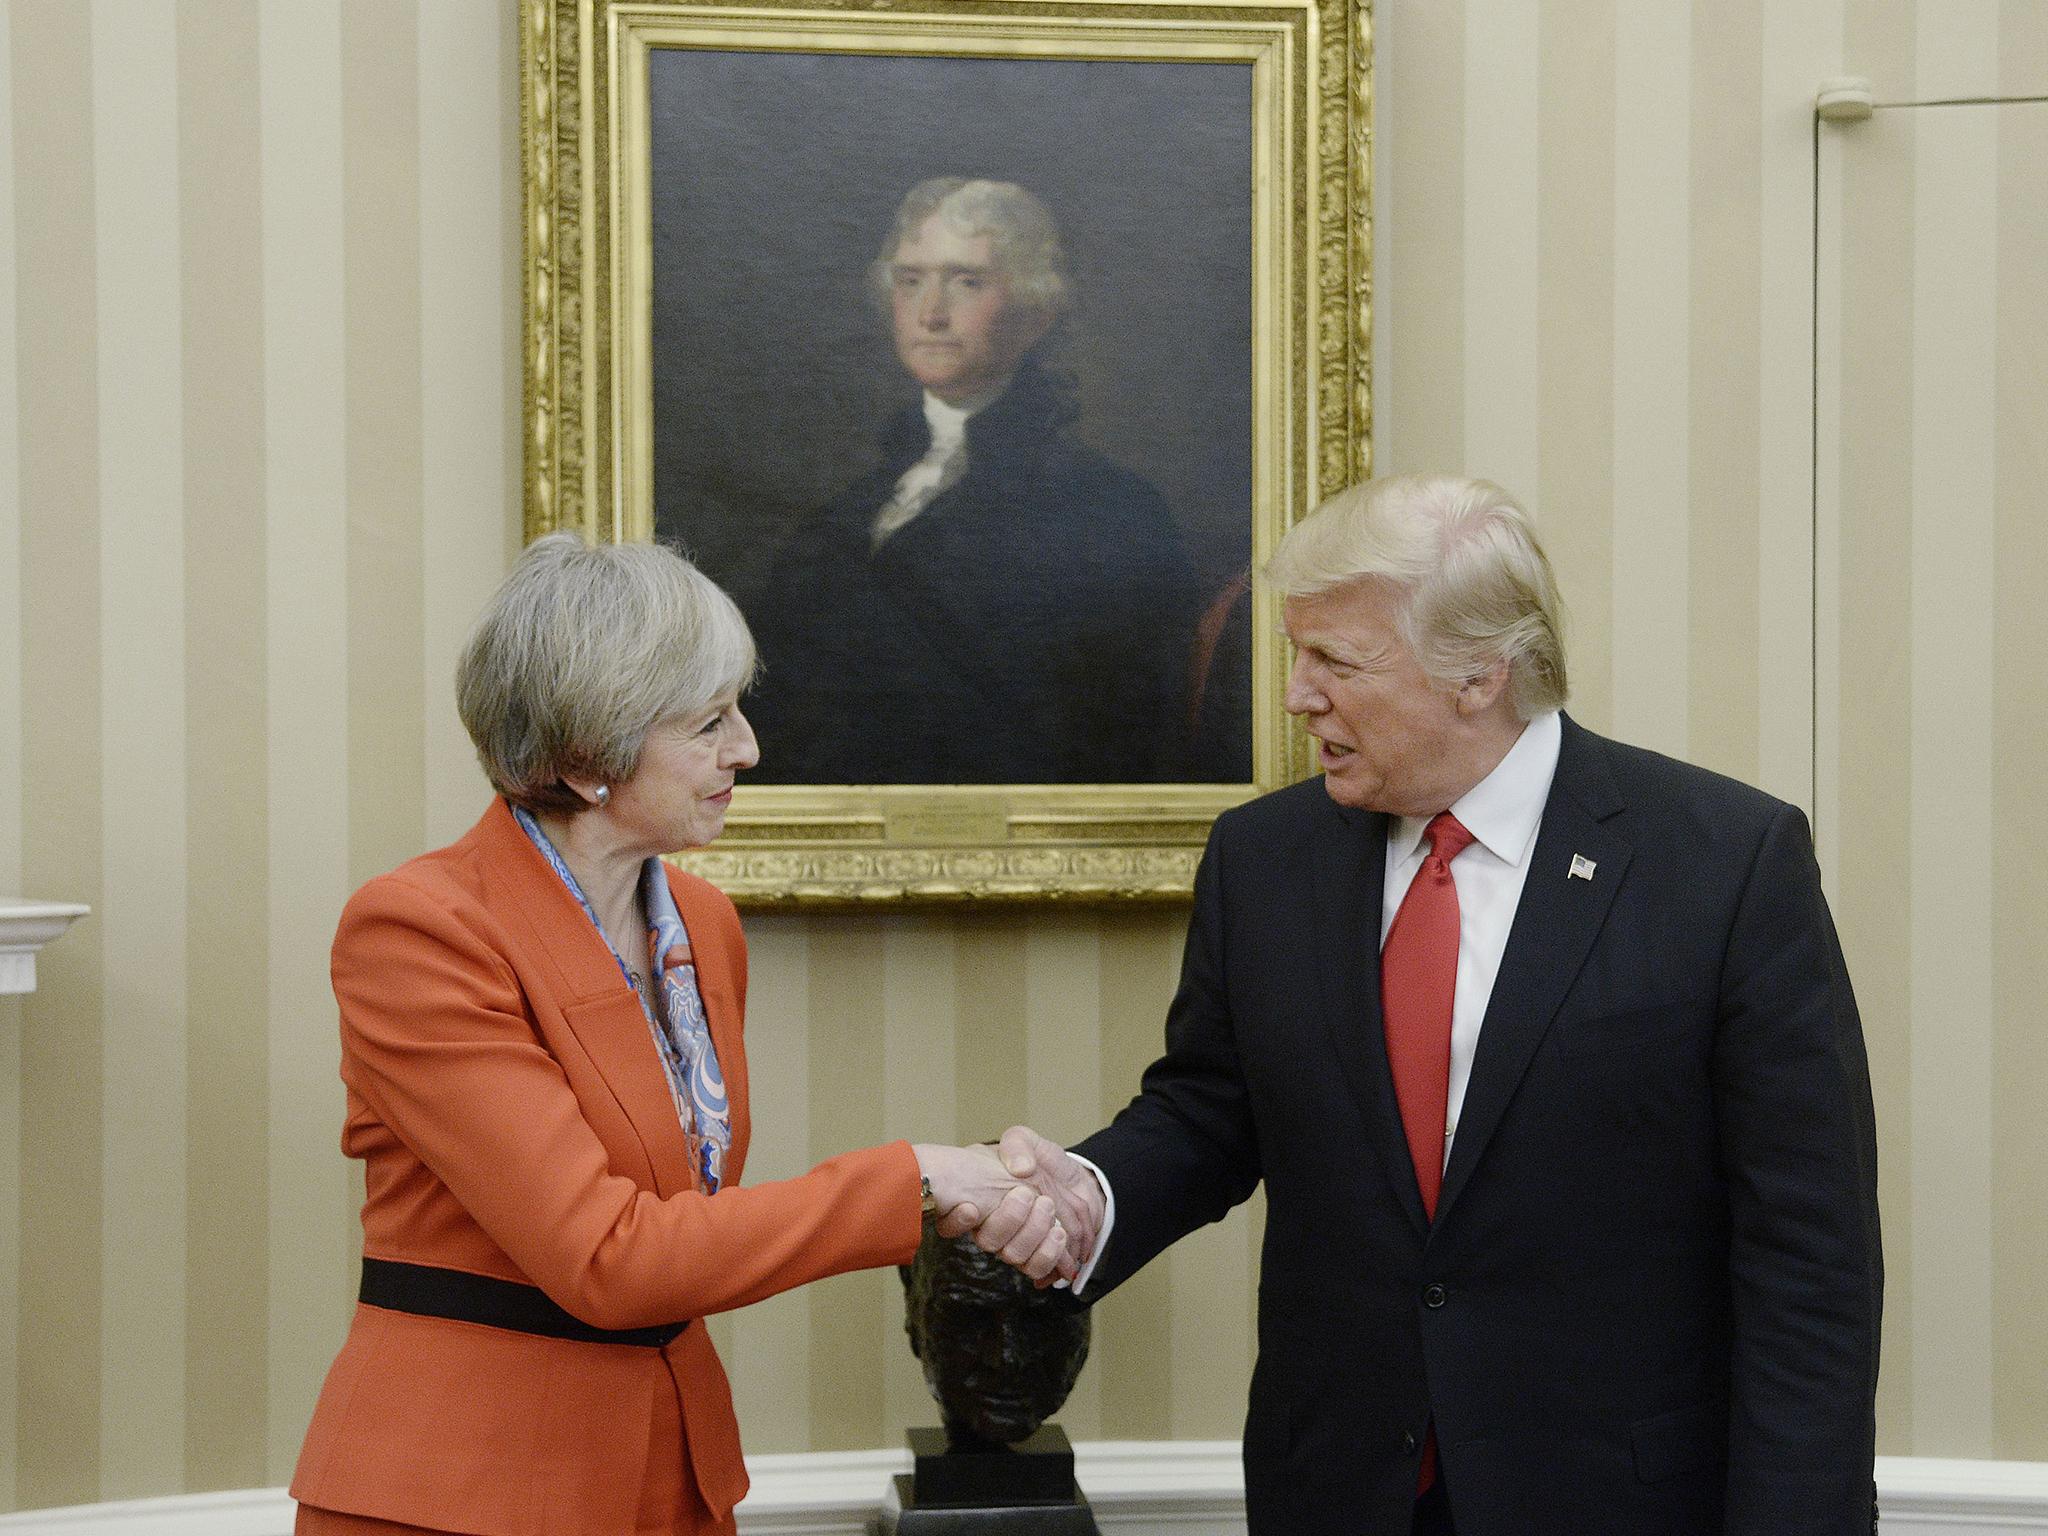 Prime Minister Theresa May met with President Donald Trump in Washington